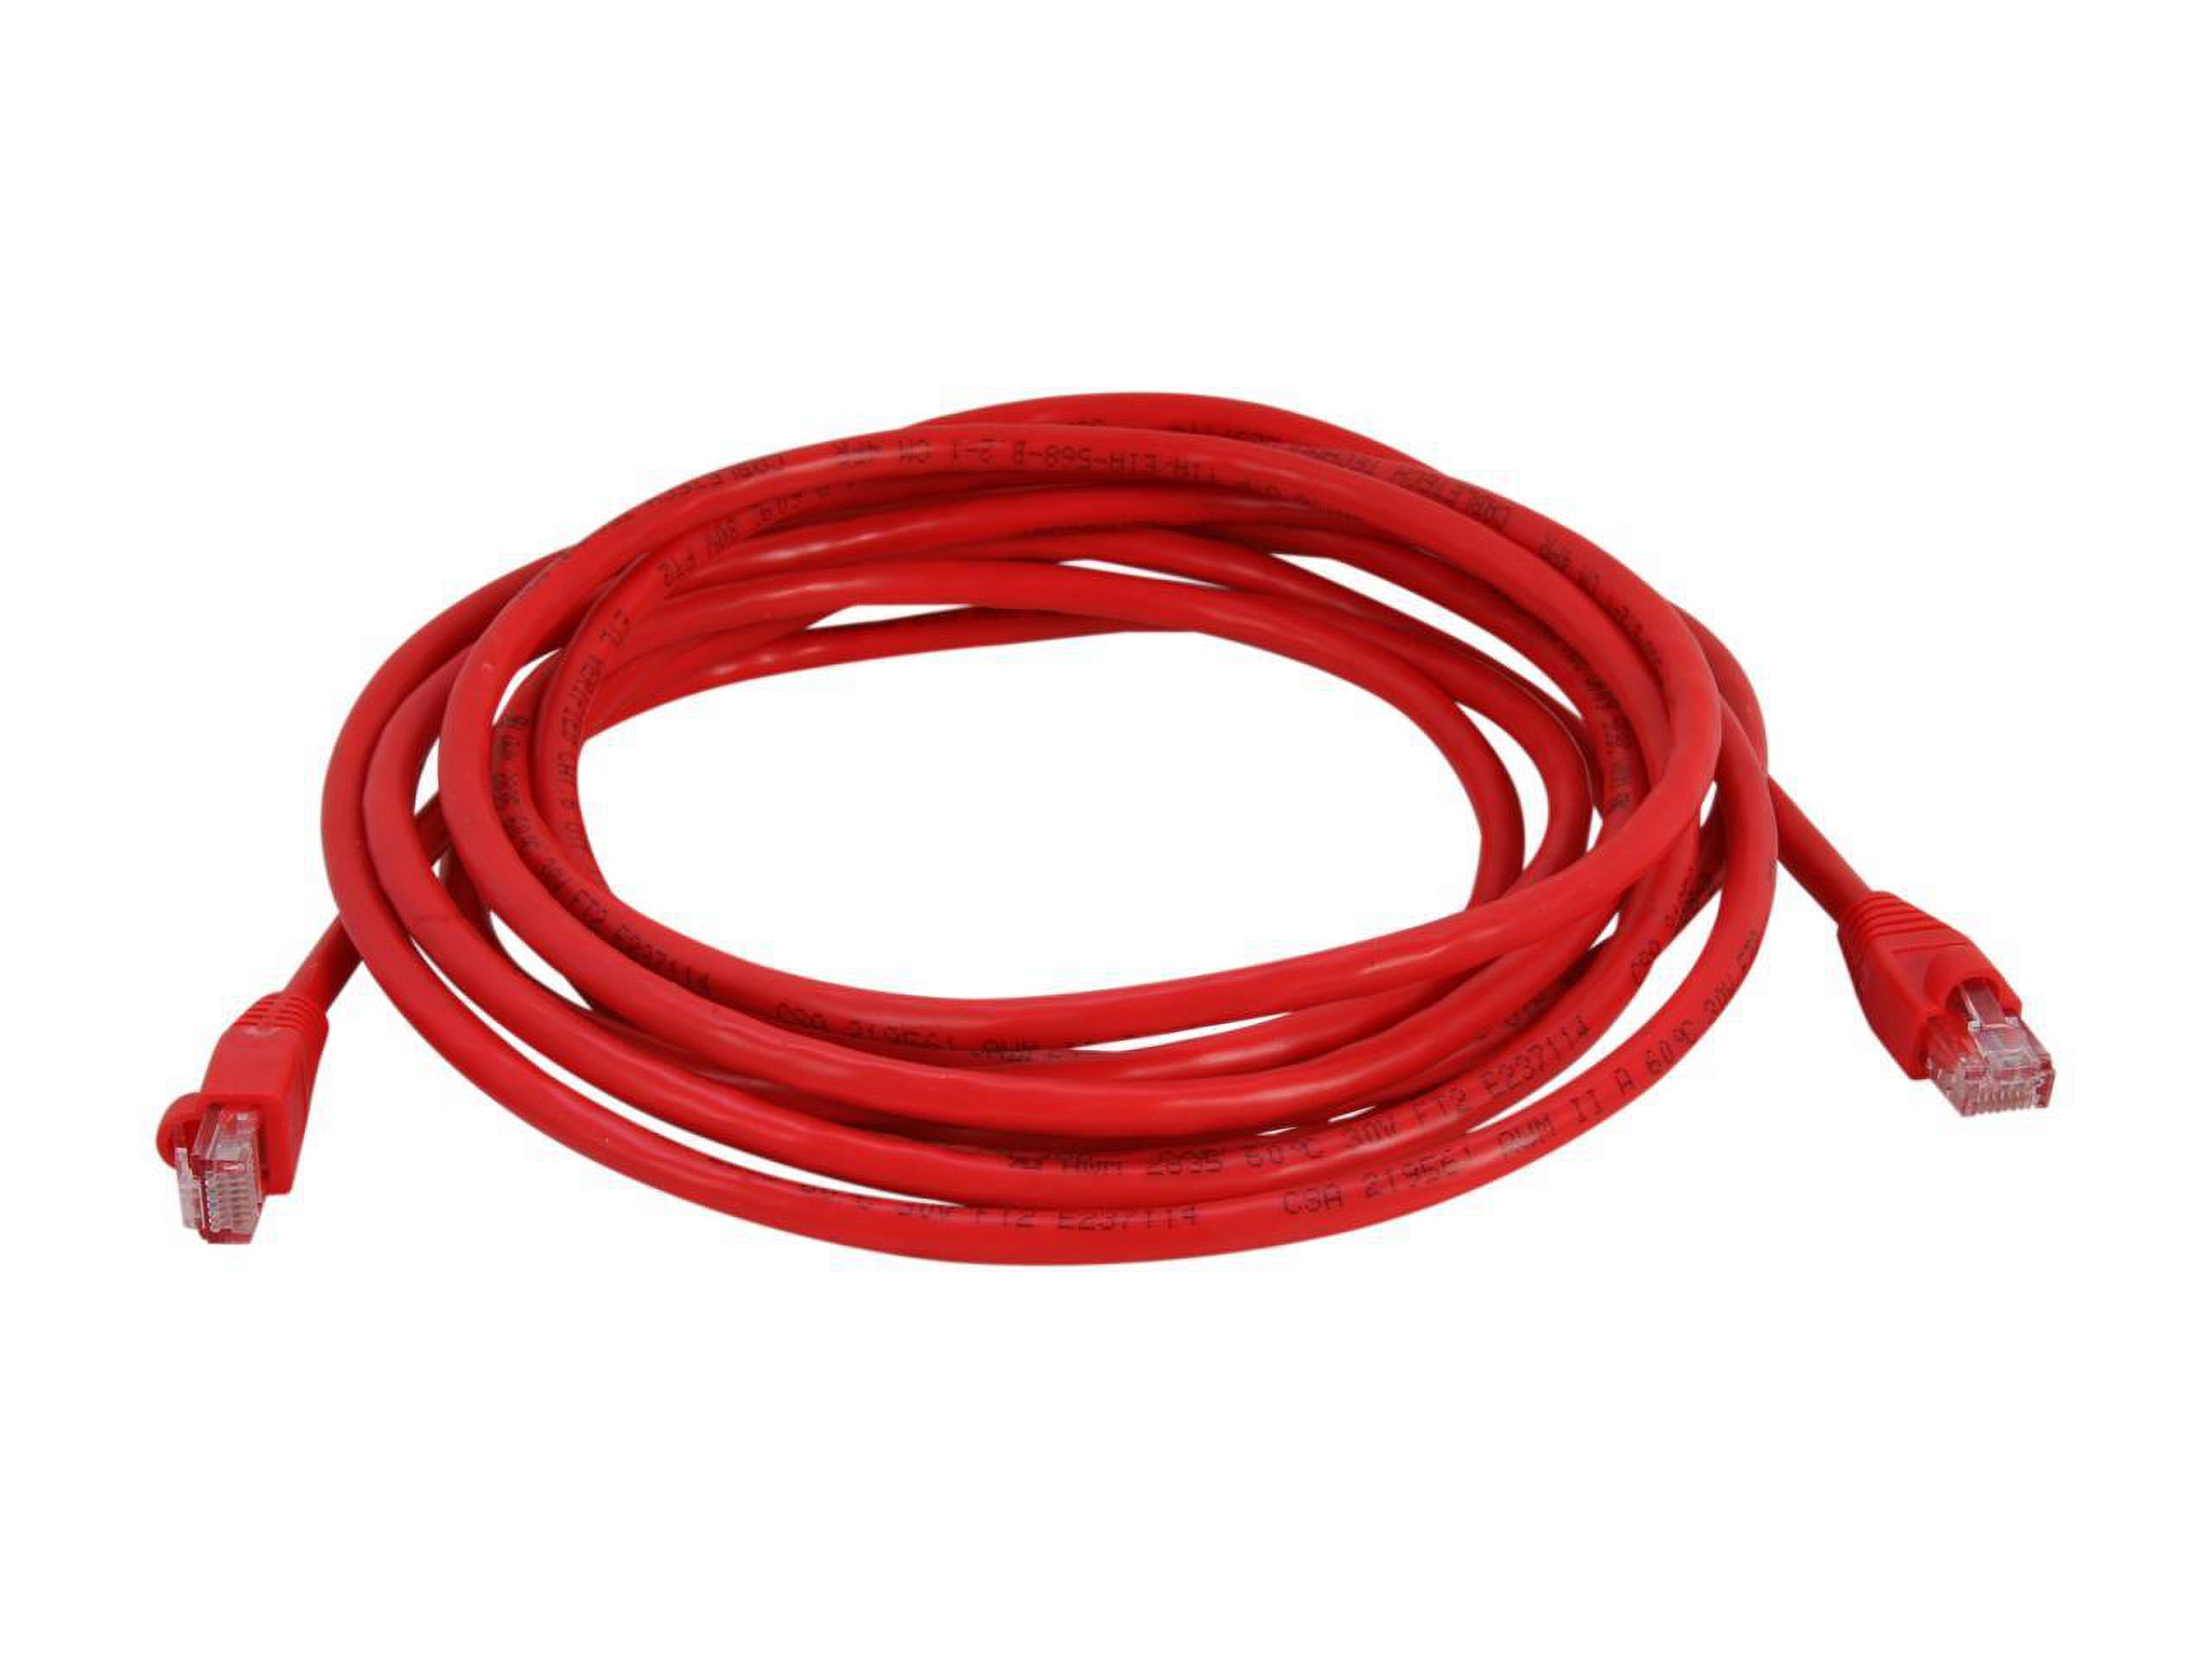 Link Depot C6M-14-RDB 14 ft. Cat 6 Red Network Cable - image 2 of 3